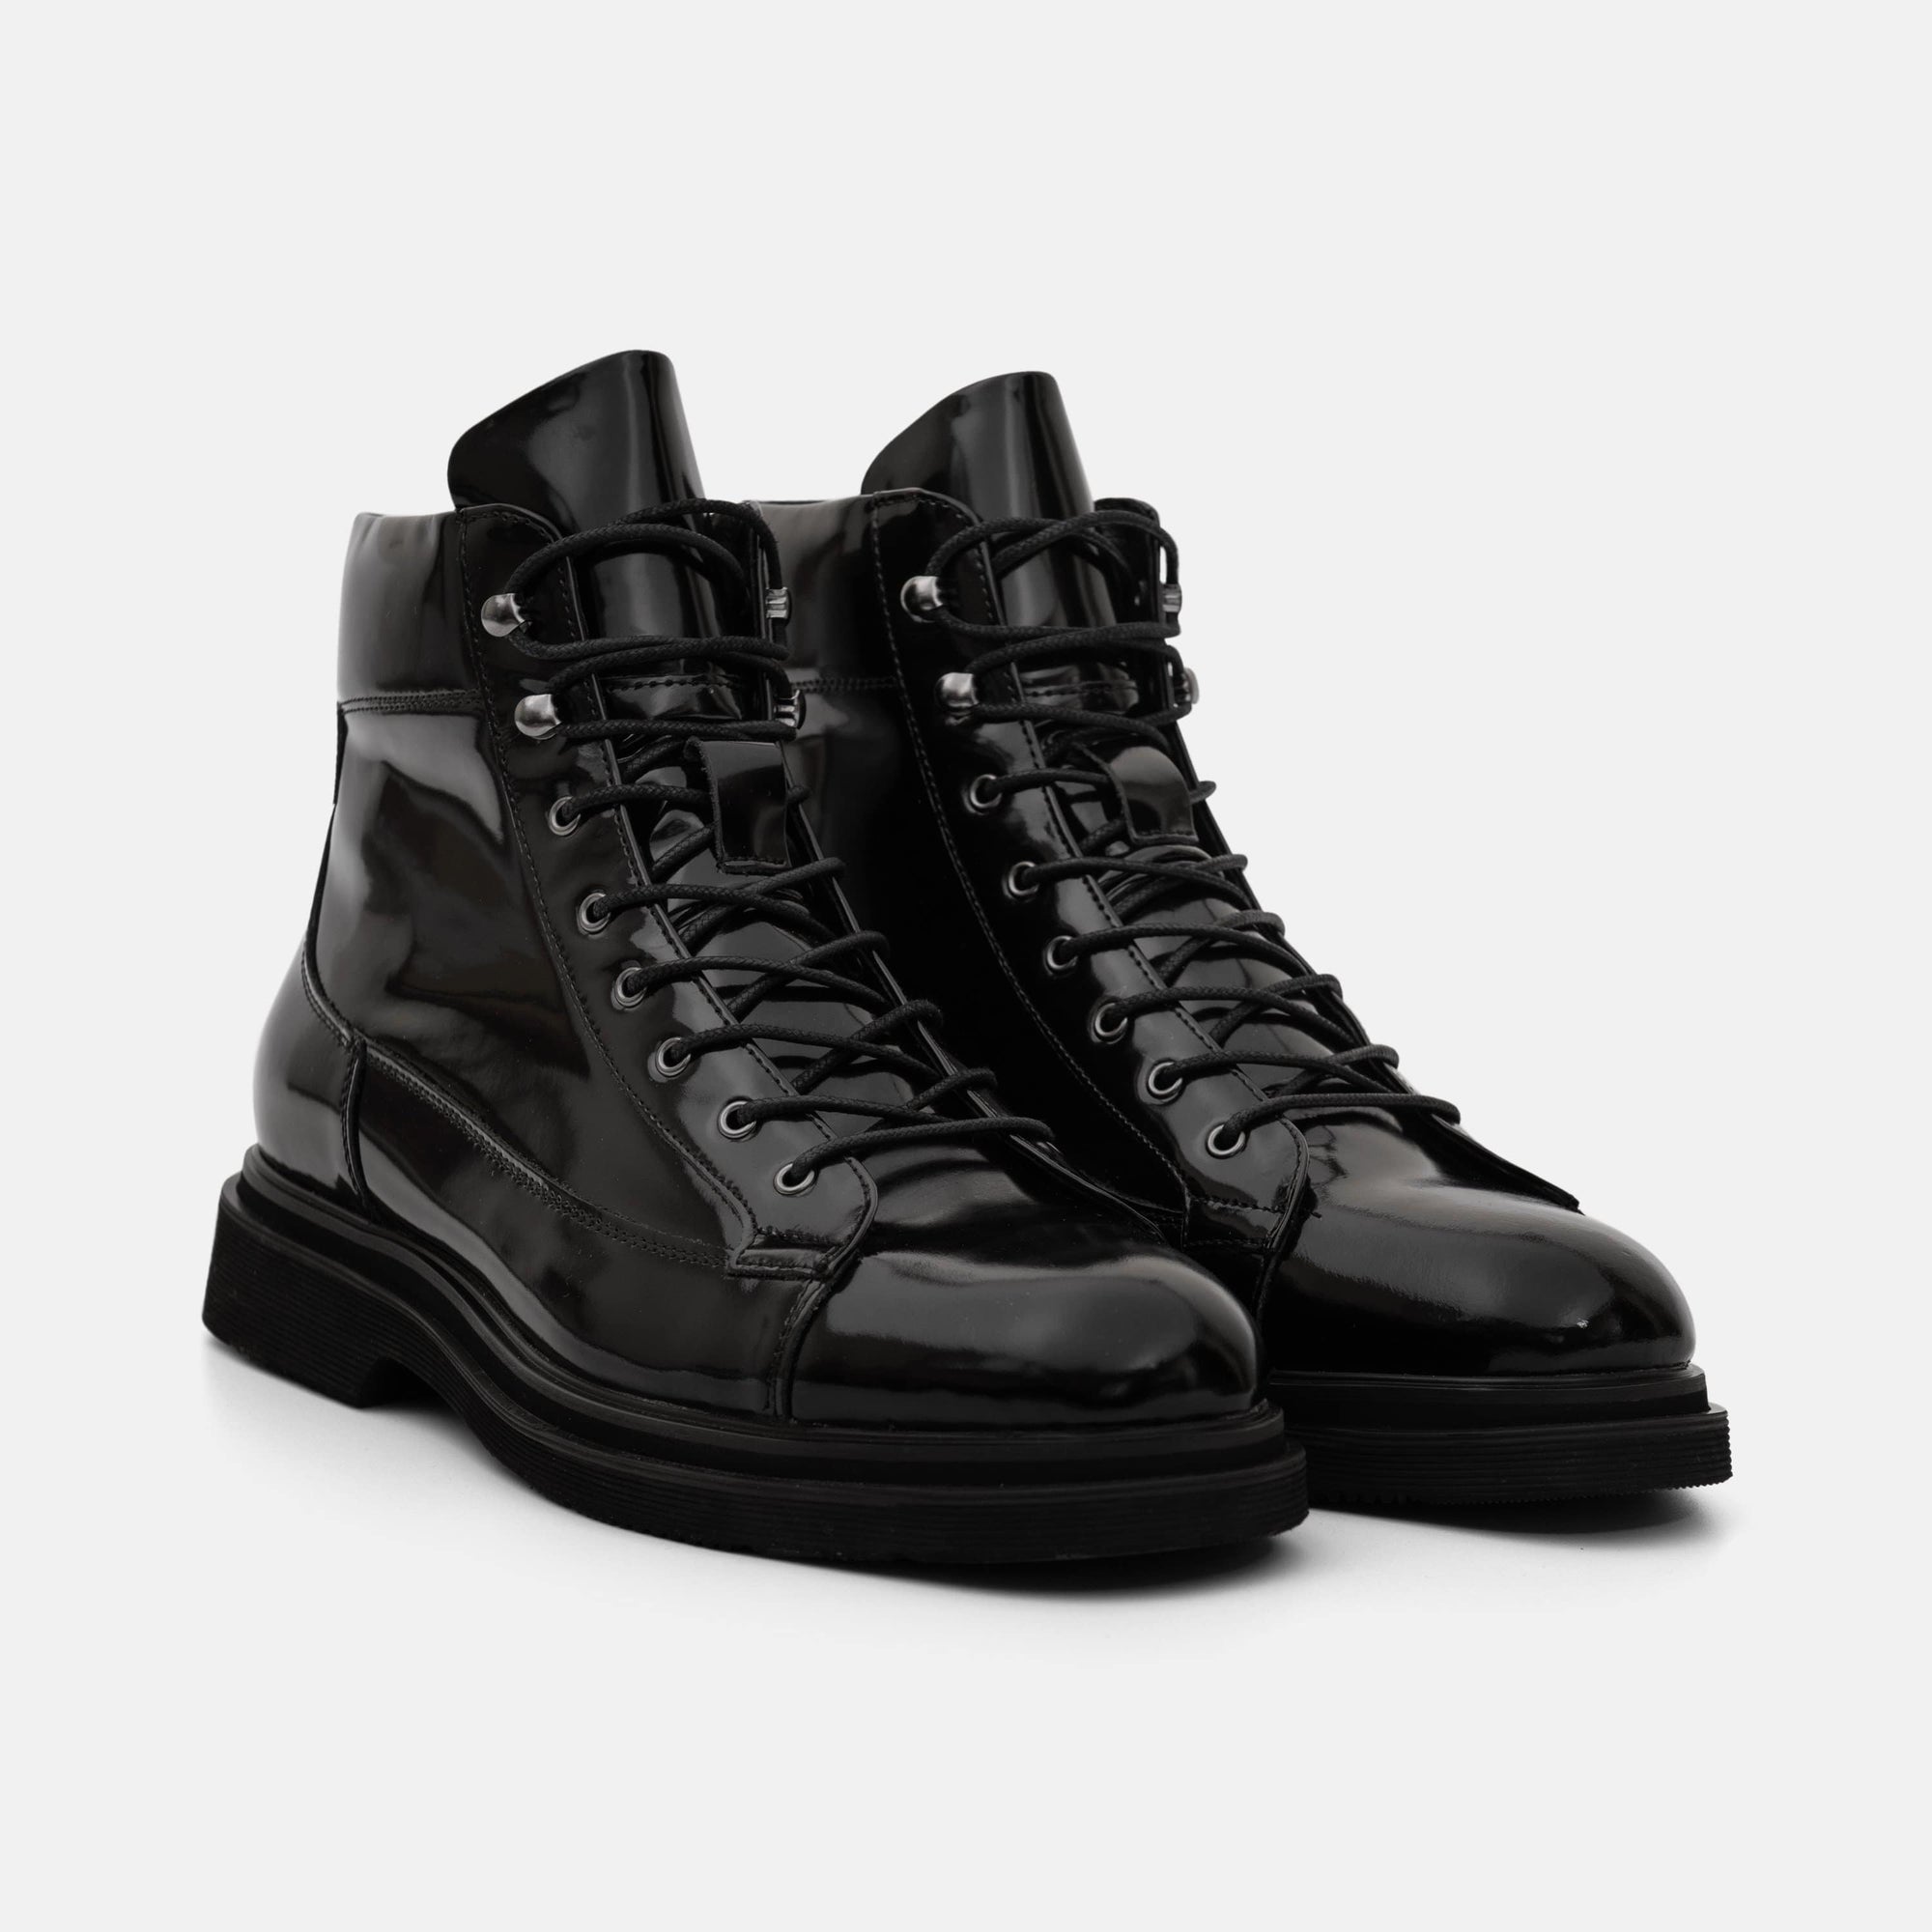 Aiden Black Leather Combat Boots - Leather - Size: 14 by Marc Nolan